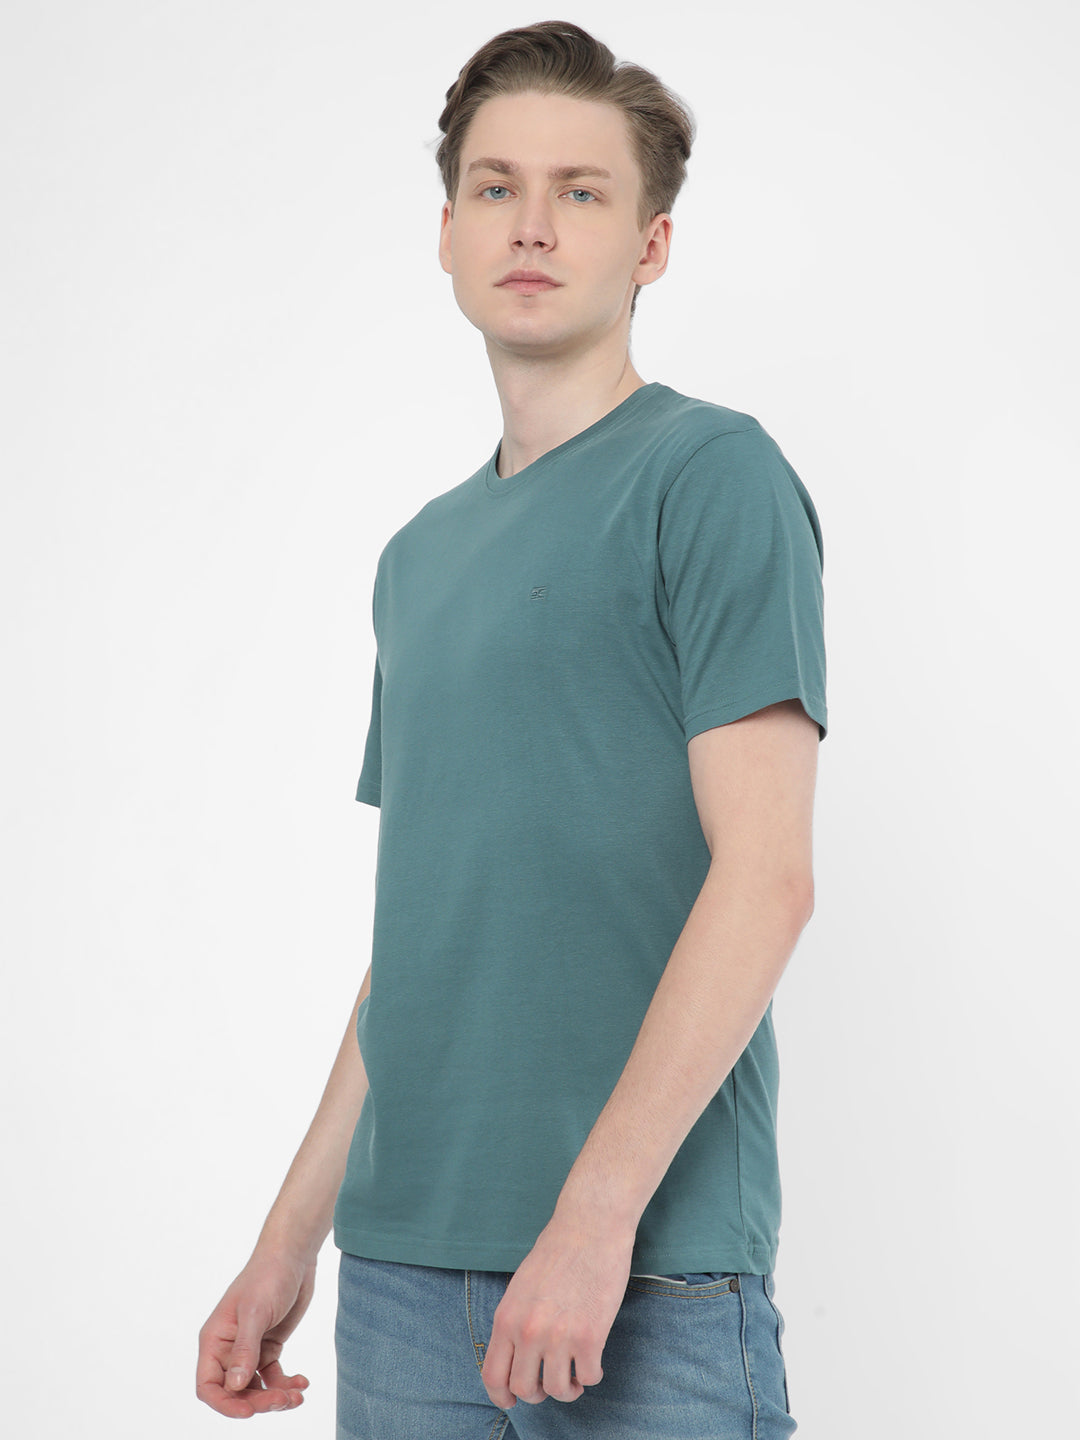 Cotstyle Cotton Fabrics Round Neck Short Length Plain Half Sleeve Casual & Daily Wear Men's T-Shirts -  Pack of 1 - Hydro Teal